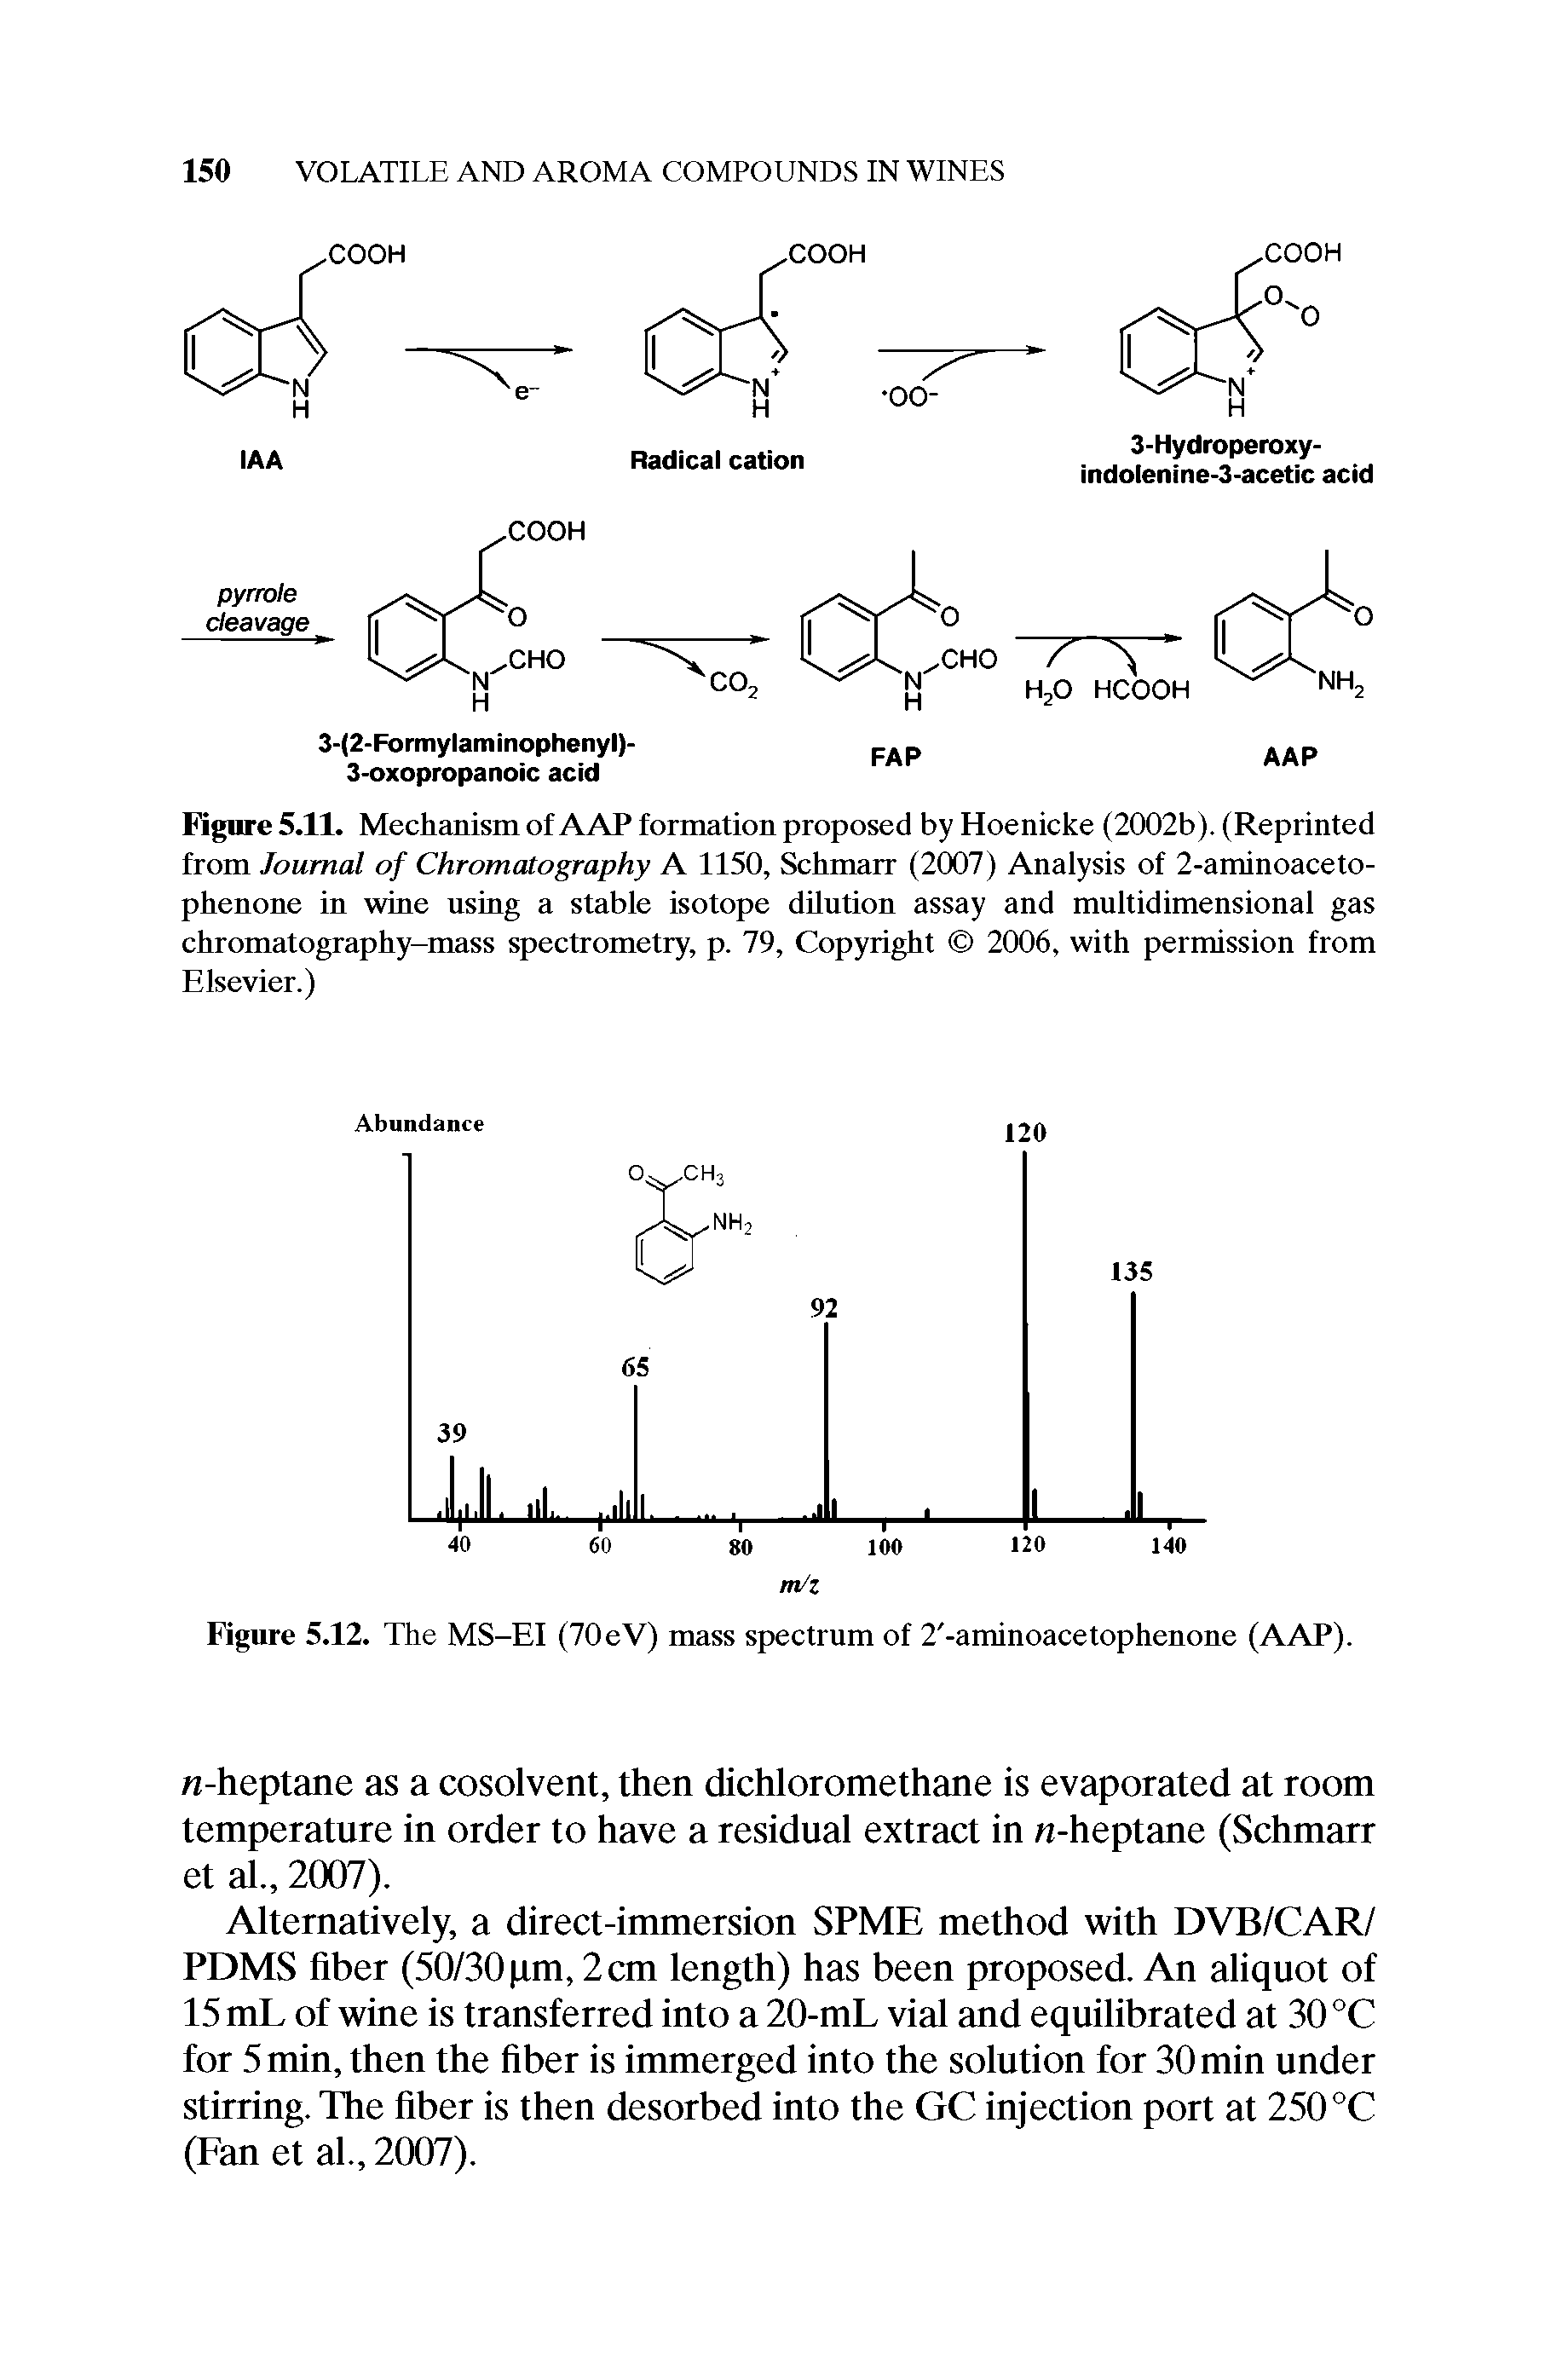 Figure 5.11. Mechanism of AAP formation proposed by Hoenicke (2002b). (Reprinted from Journal of Chromatography A 1150, Schmarr (2007) Analysis of 2-aminoaceto-phenone in wine using a stable isotope dilution assay and multidimensional gas chromatography-mass spectrometry, p. 79, Copyright 2006, with permission from Elsevier.)...